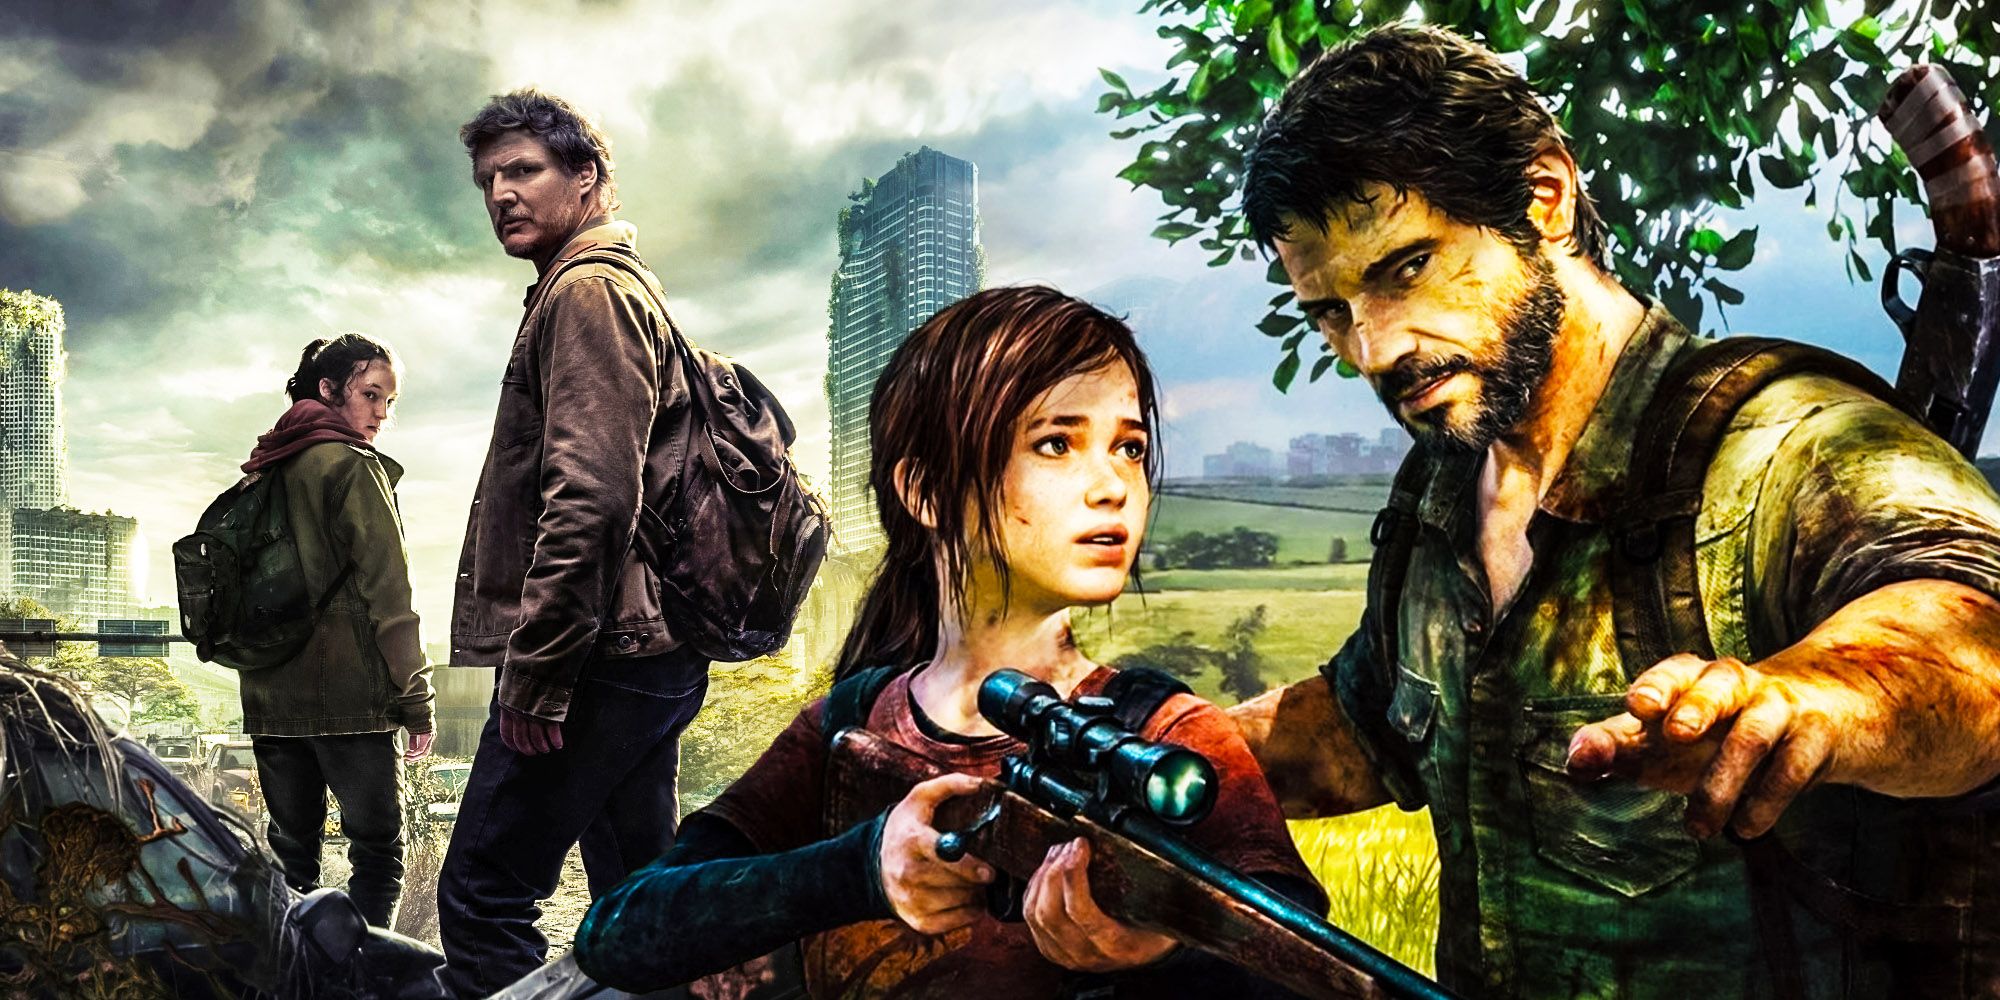 Ellie and Joel in the Last of Us show and game